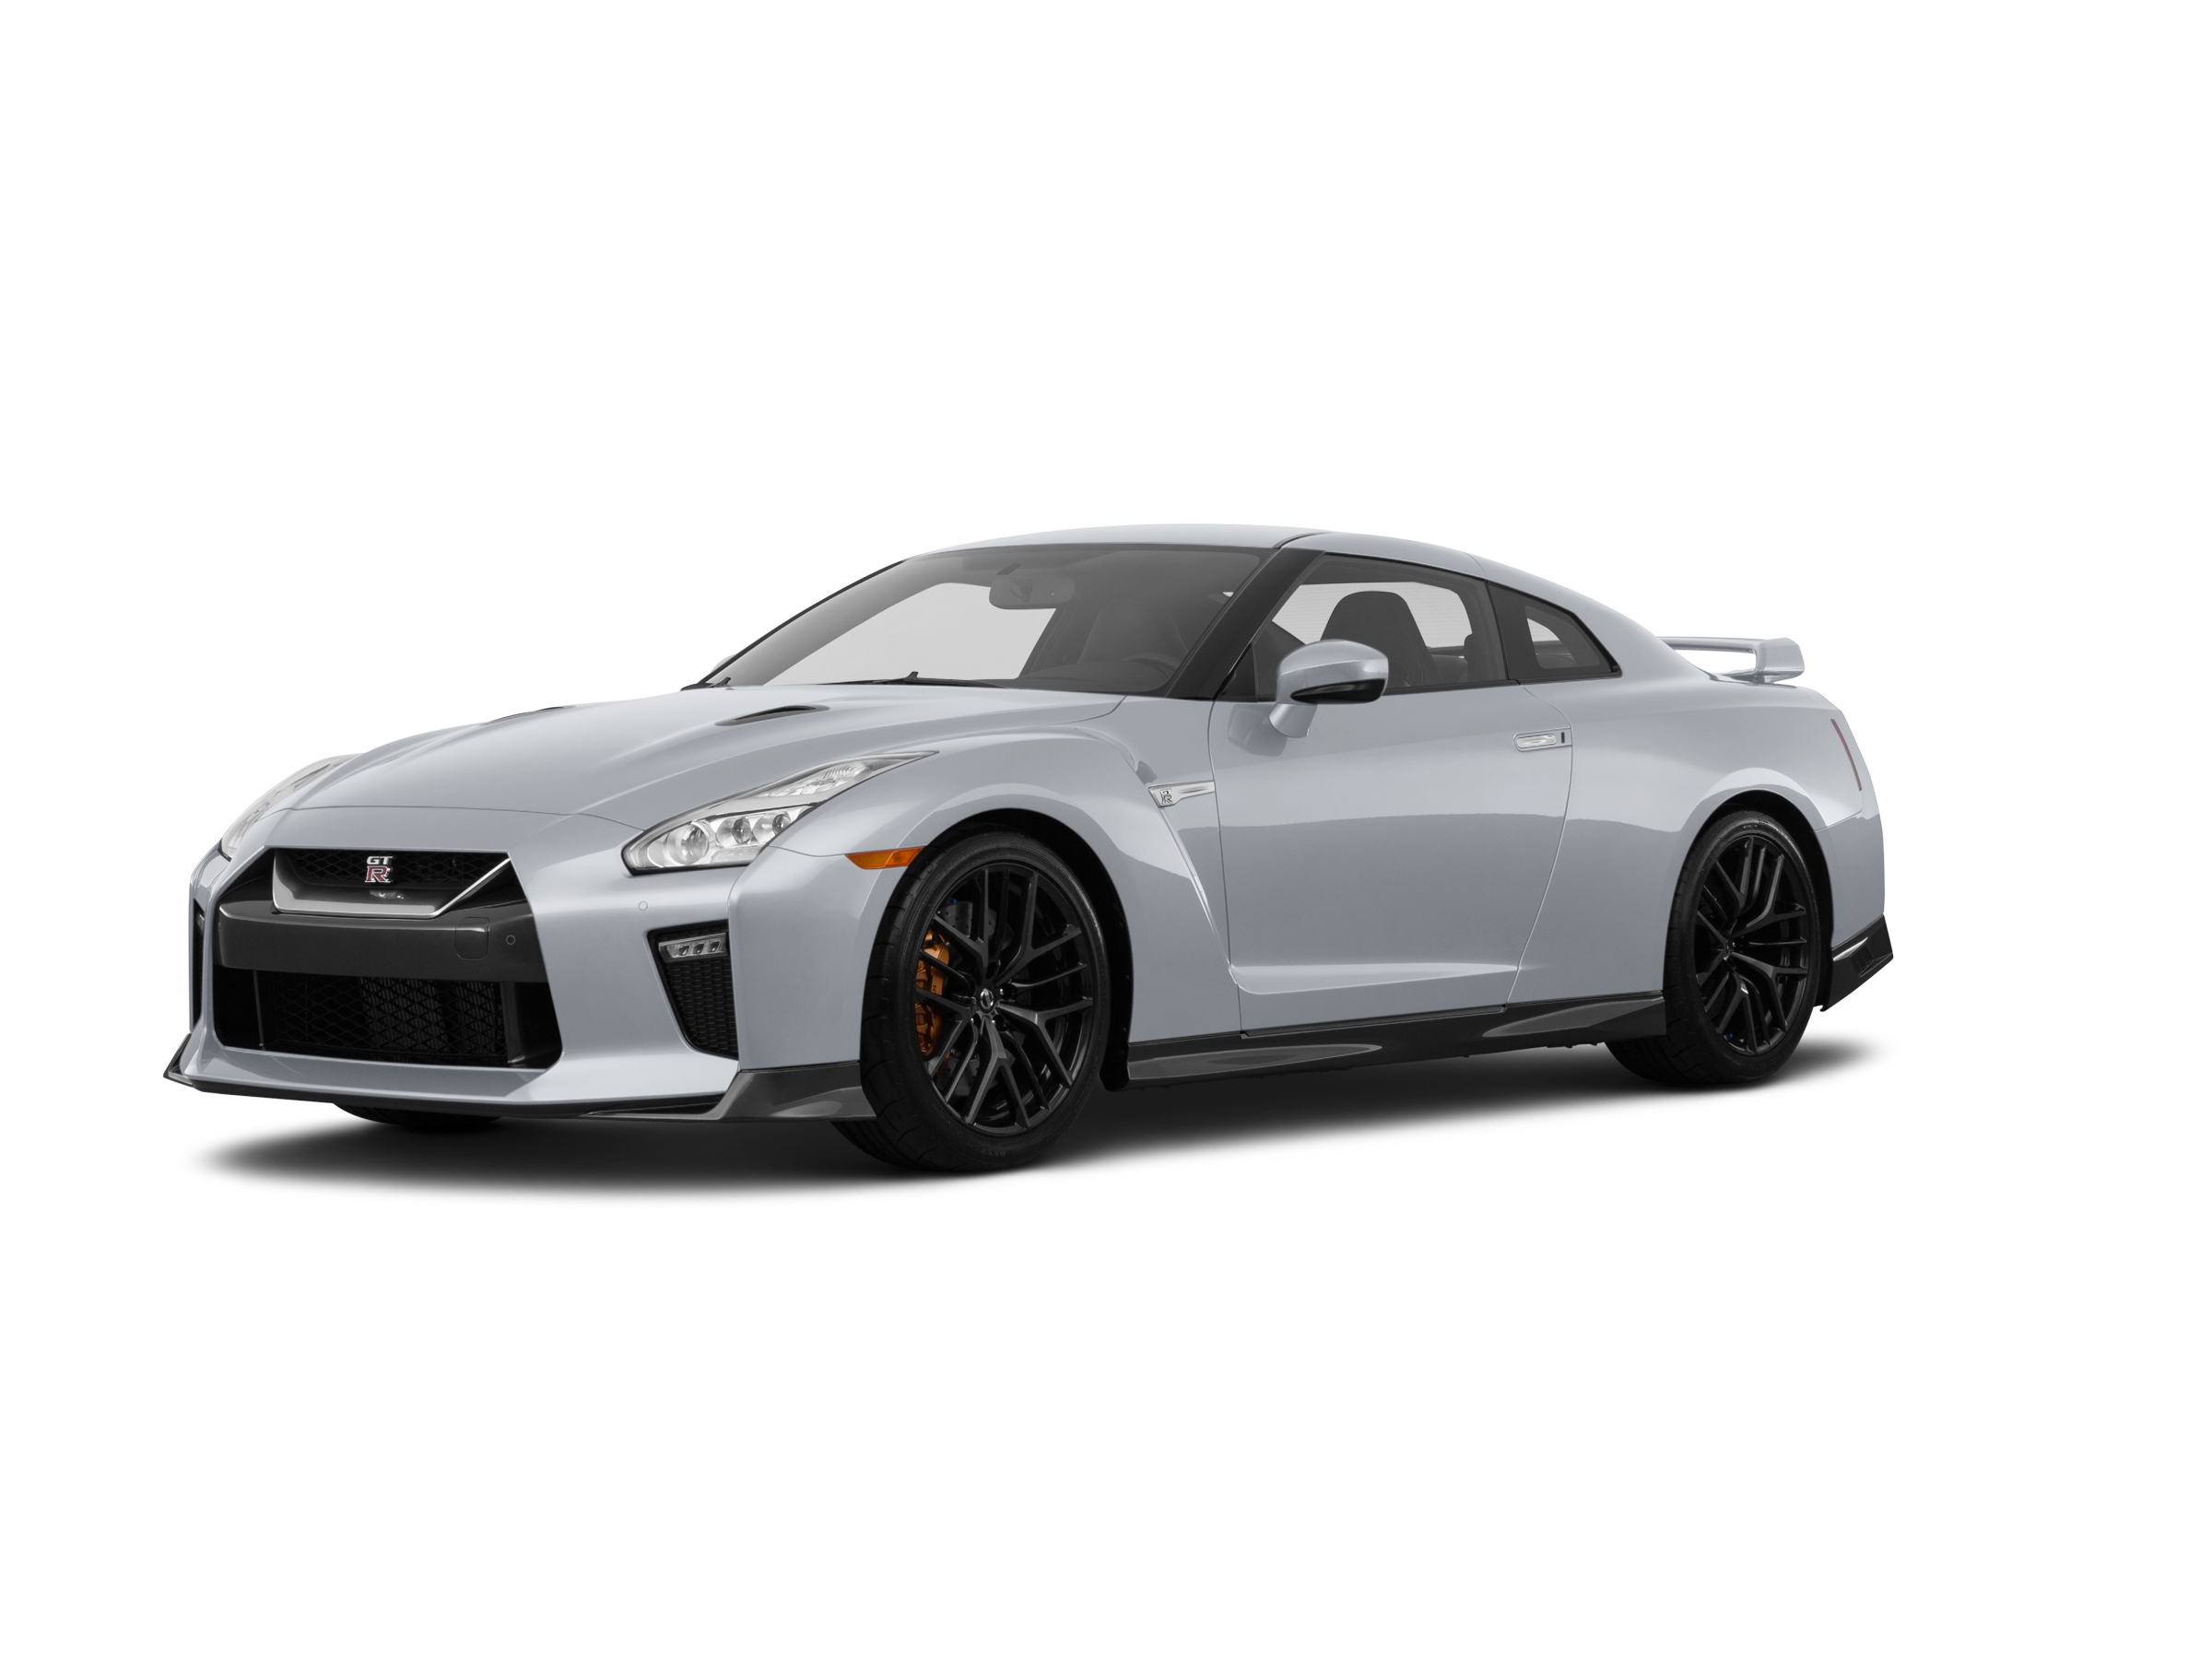 Meet The Nissan GT-R Pure: New Cheaper Trim For 2018